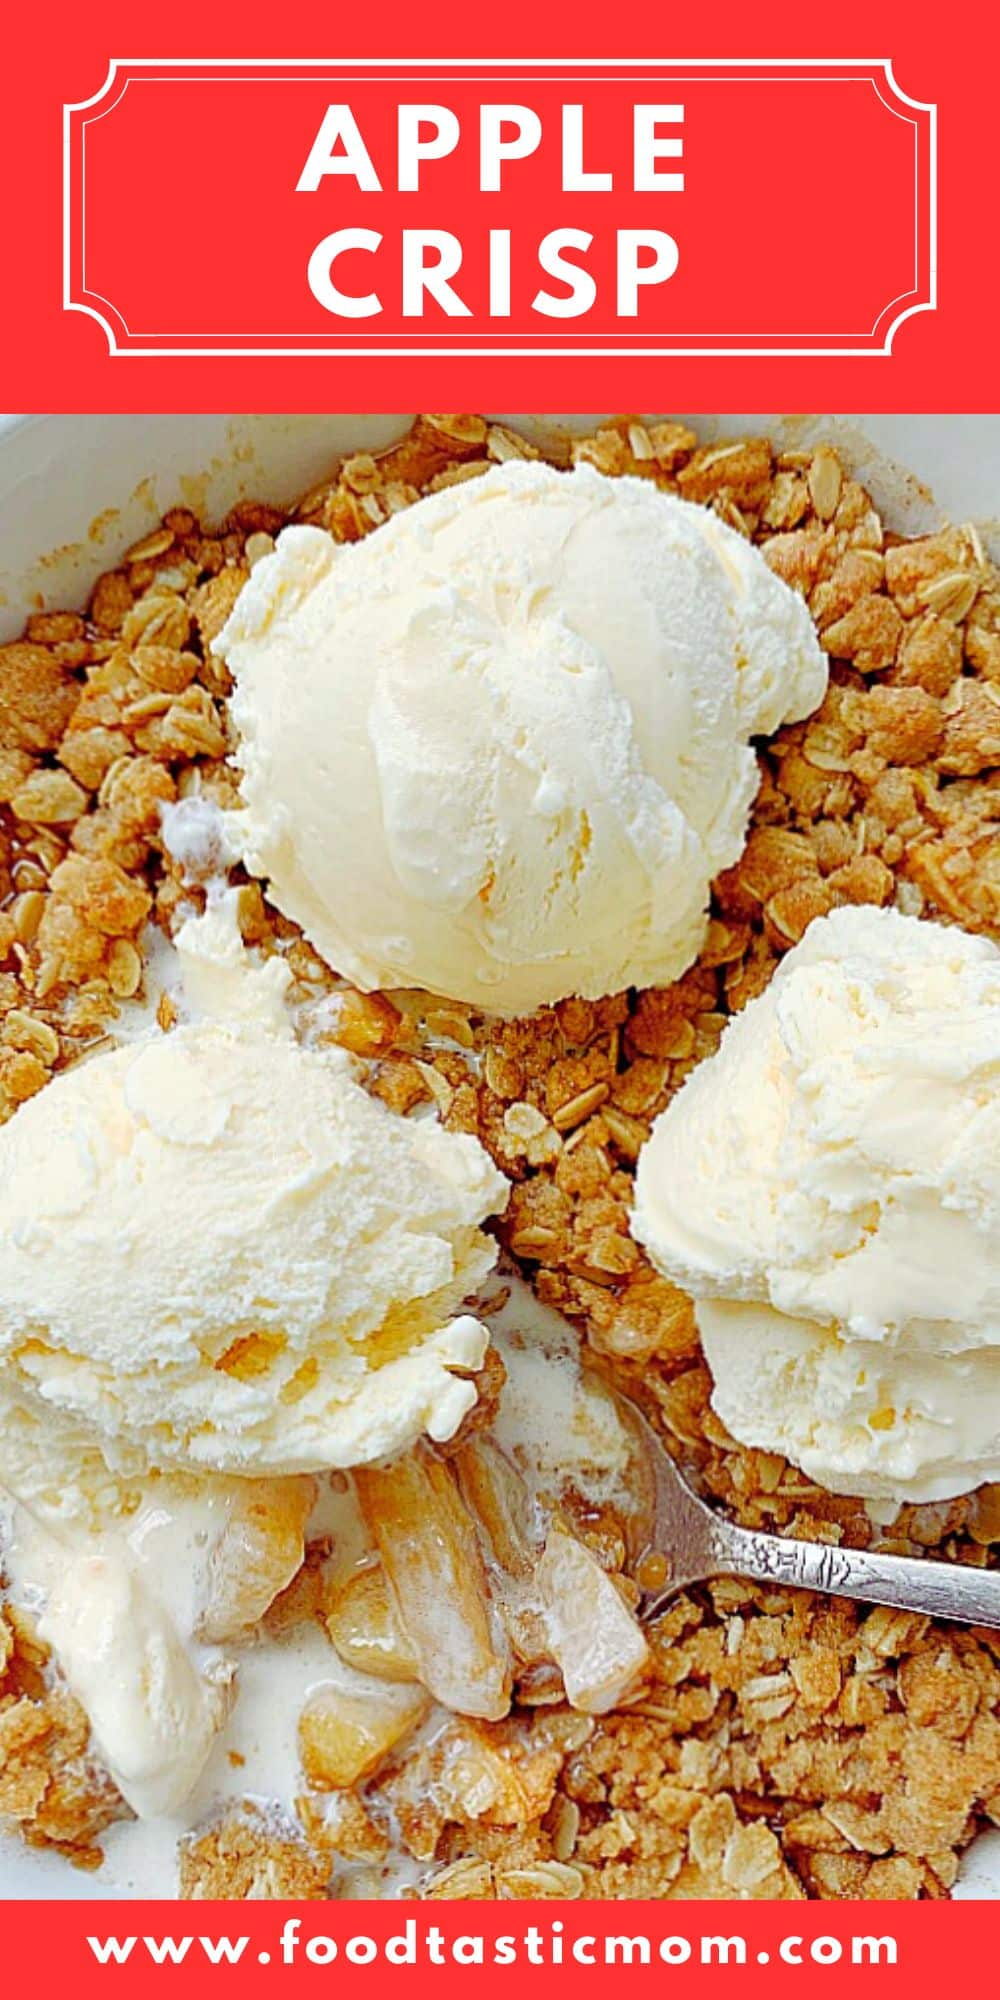 This Simply Delicious Apple Crisp is a tried and true recipe that is perfect for showing off the season's best apples.  via @foodtasticmom